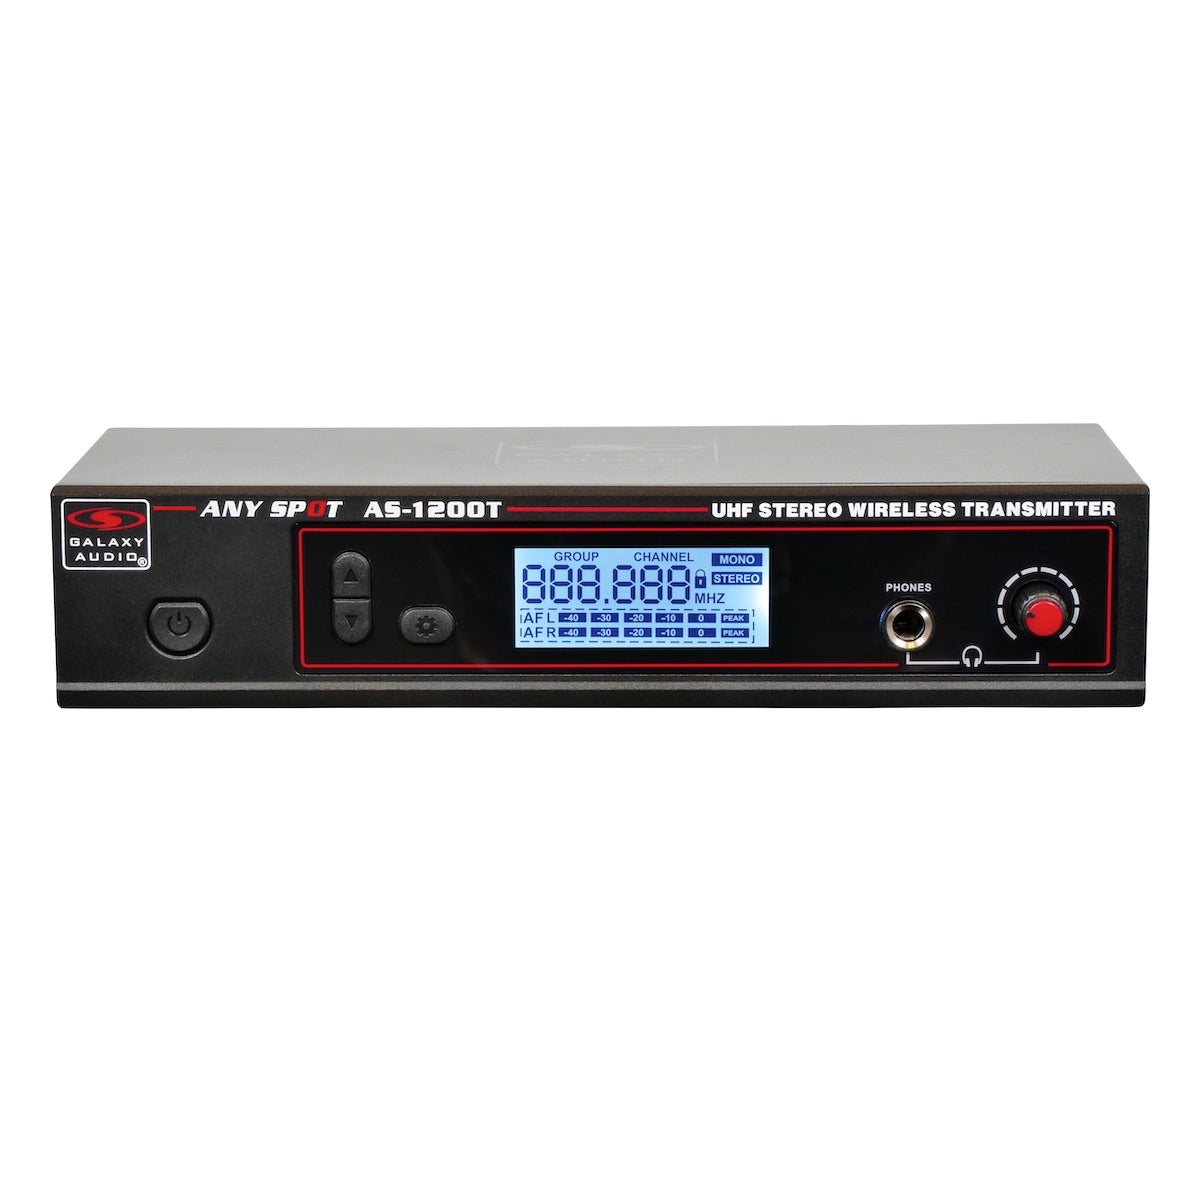 Galaxy Audio AS-1200t, transmitter front